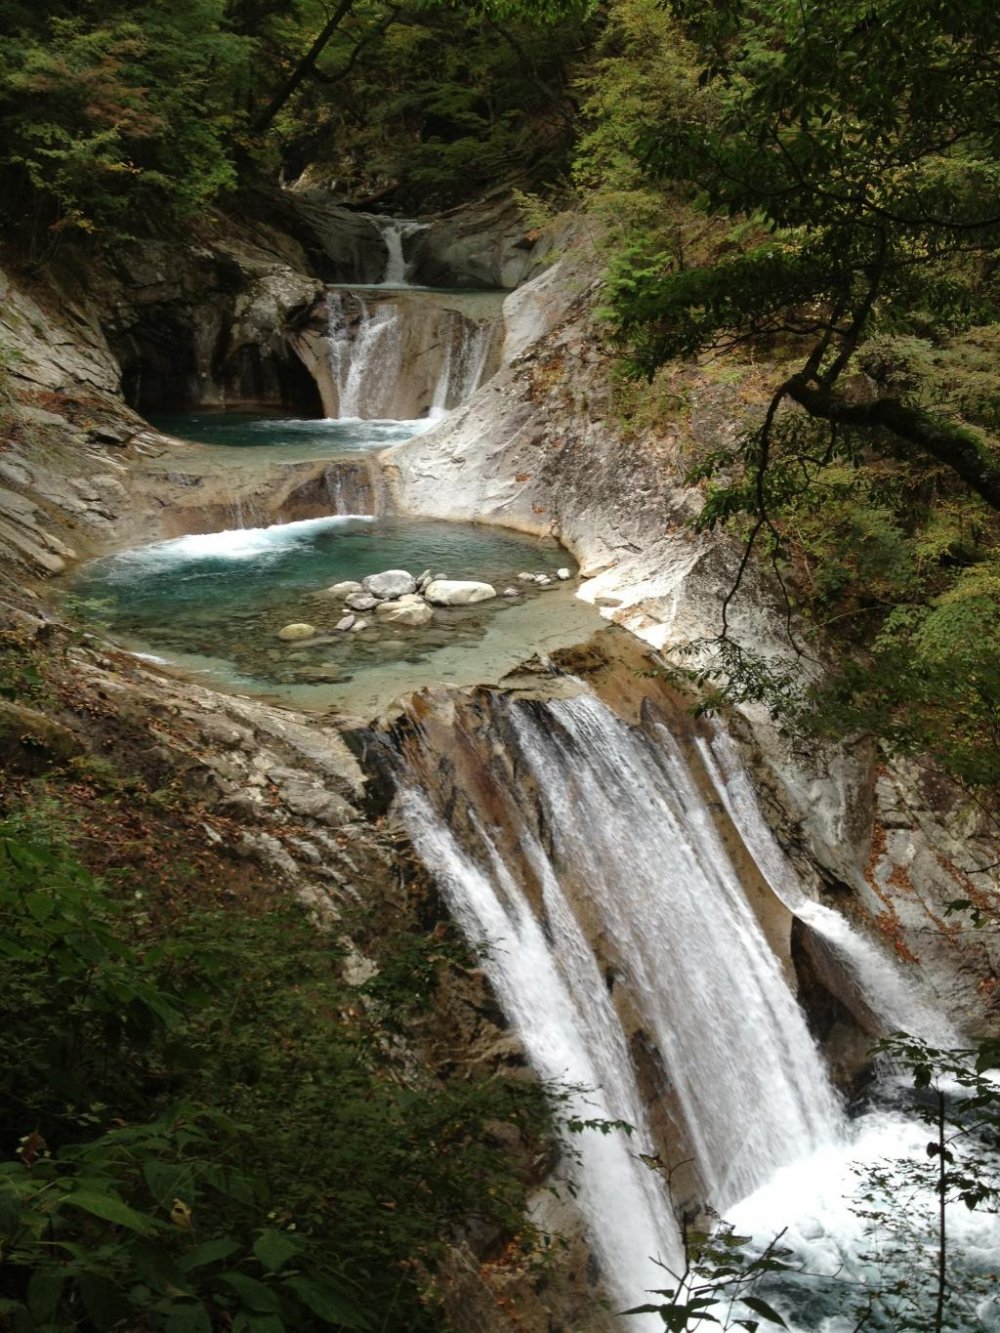 Roughly 90 minutes from the trailhead (closer to two hours from the parking lot) you'll come to Nanatsugama-Godan-no-Taki, a beautiful five-tiered waterfall.